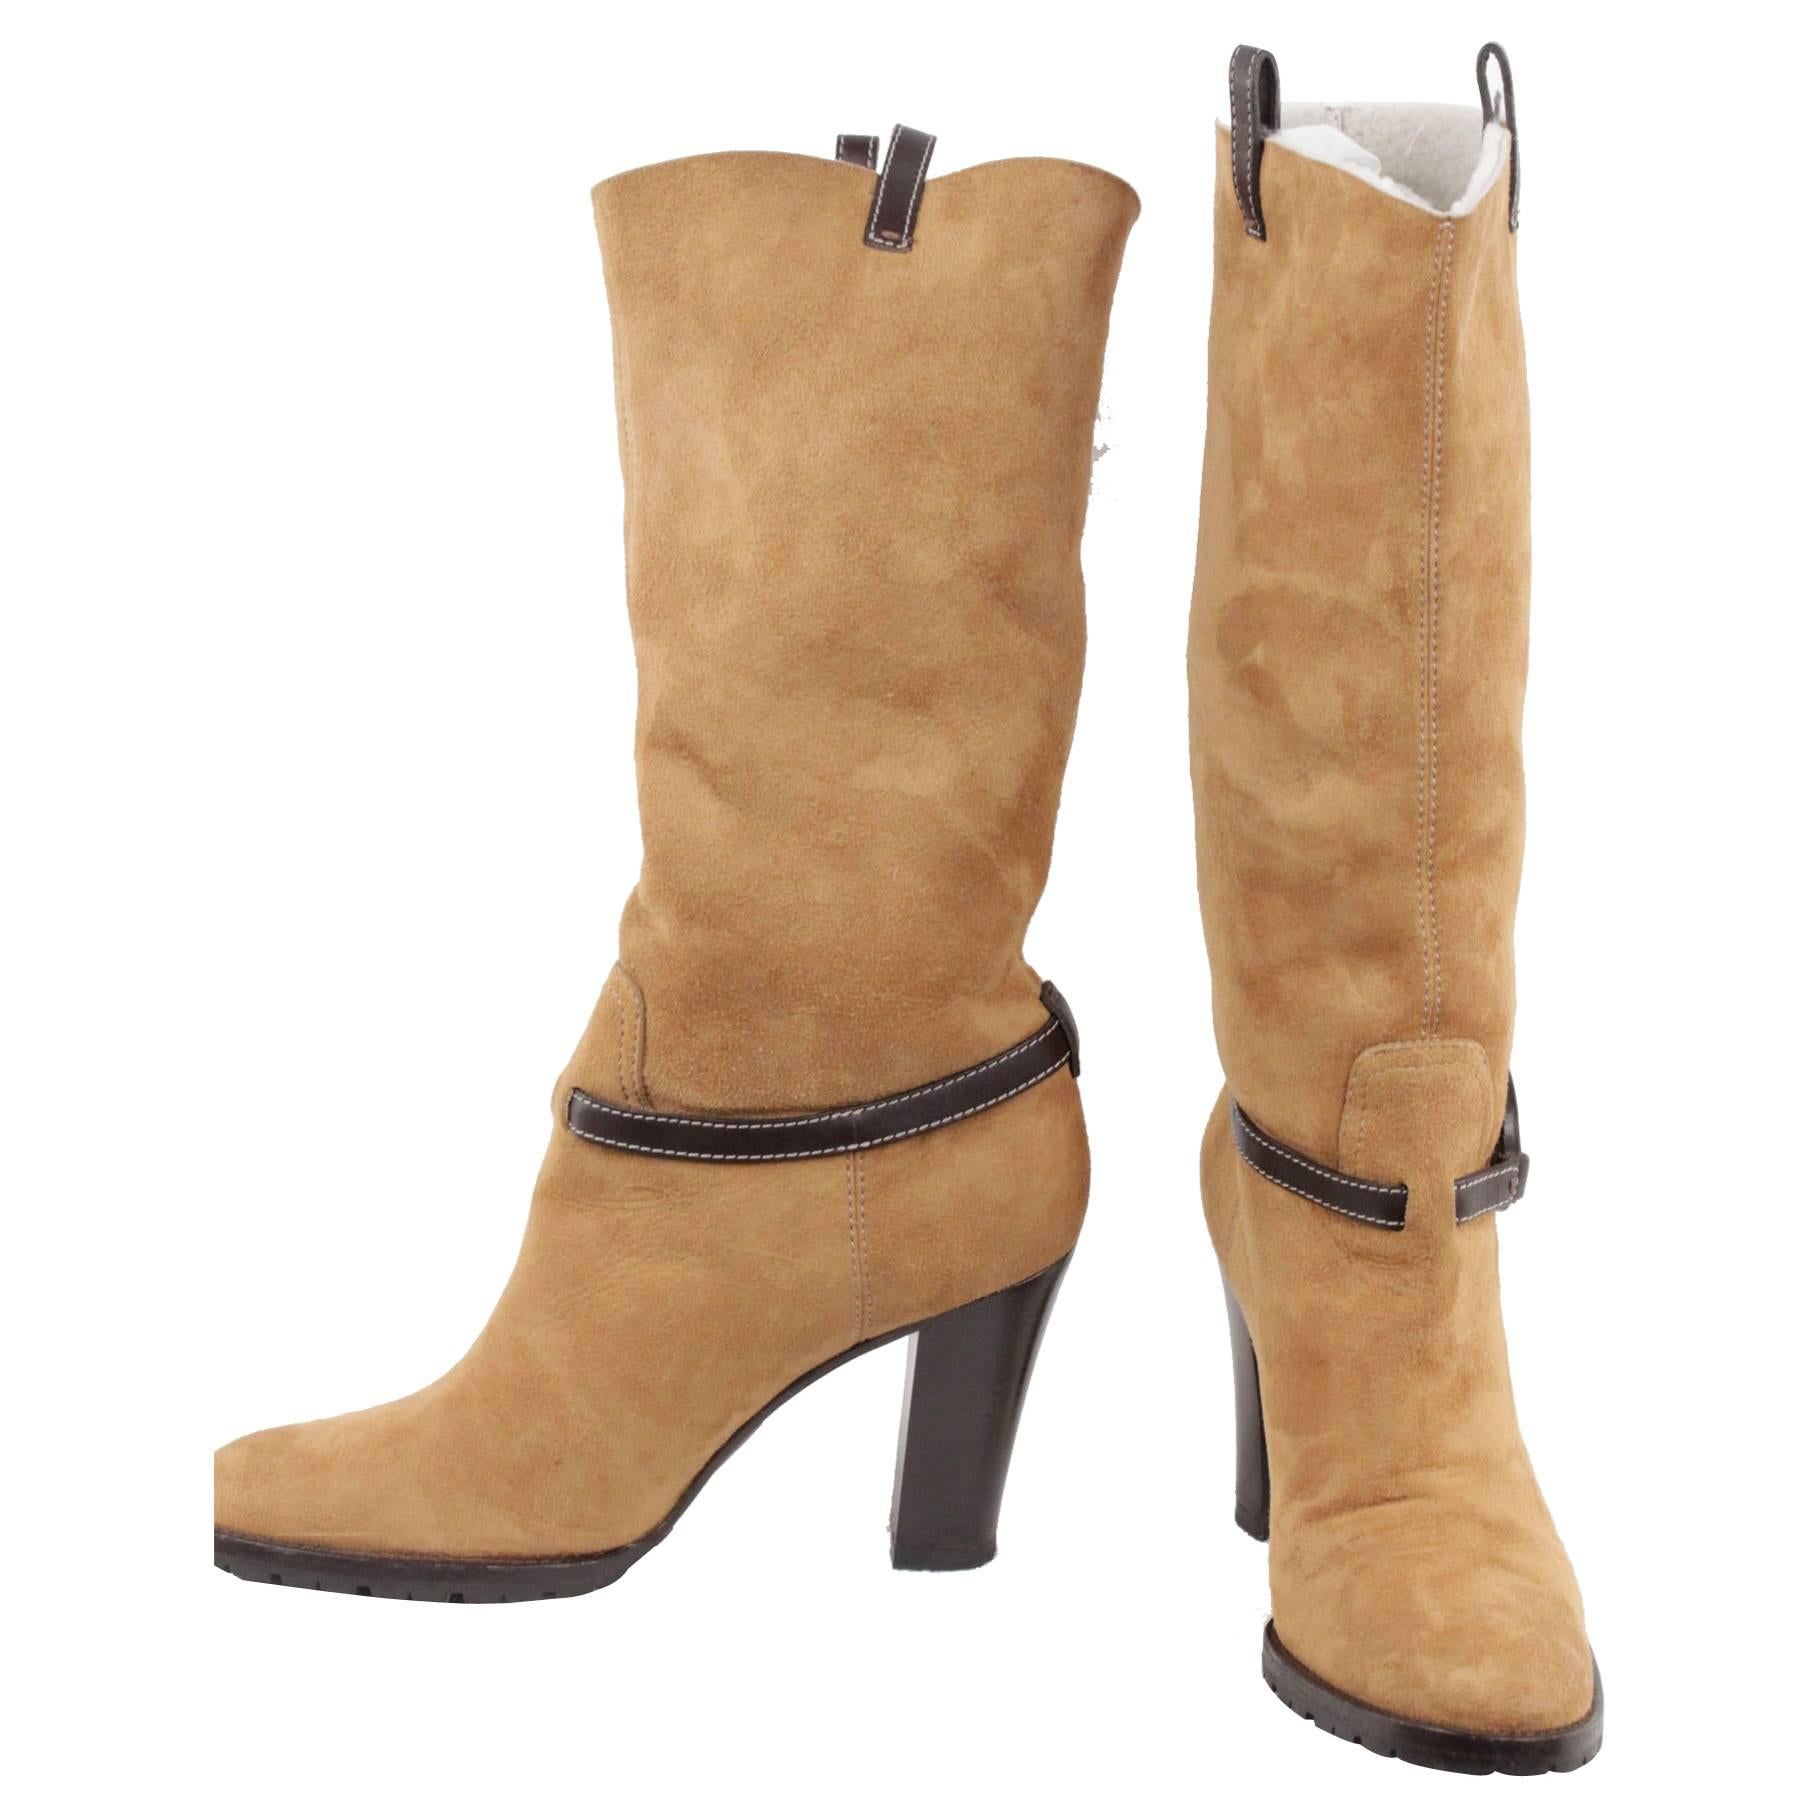 GUCCI Beige Suede HEELED BOOTS Shearling Lining GG LOGO Size 38 1/2